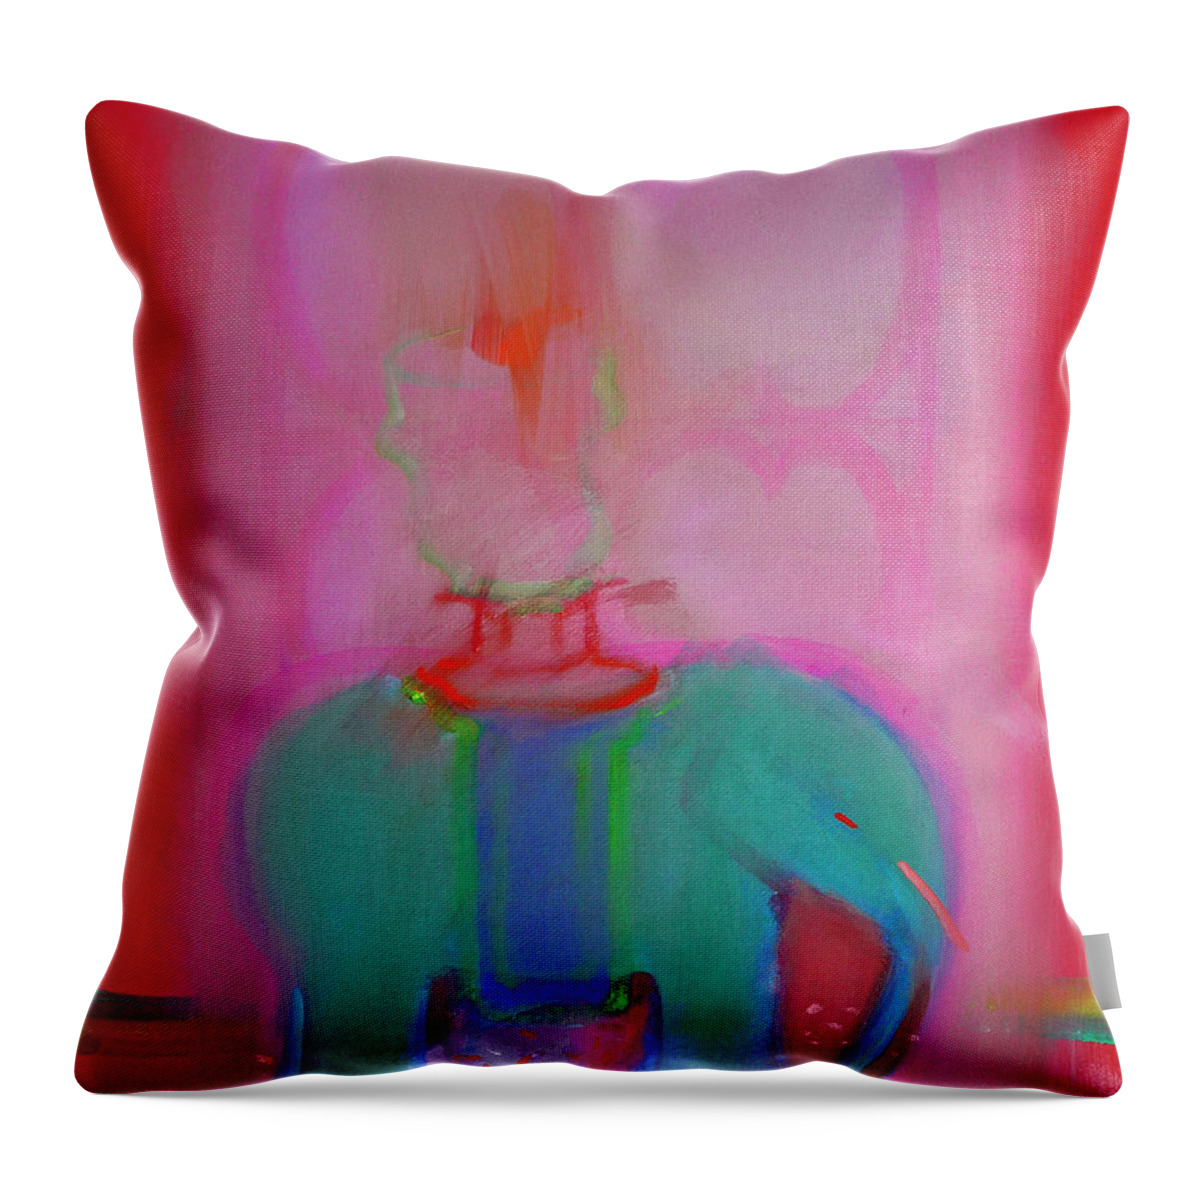 Elephant Throw Pillow featuring the painting Indian Elephant by Charles Stuart